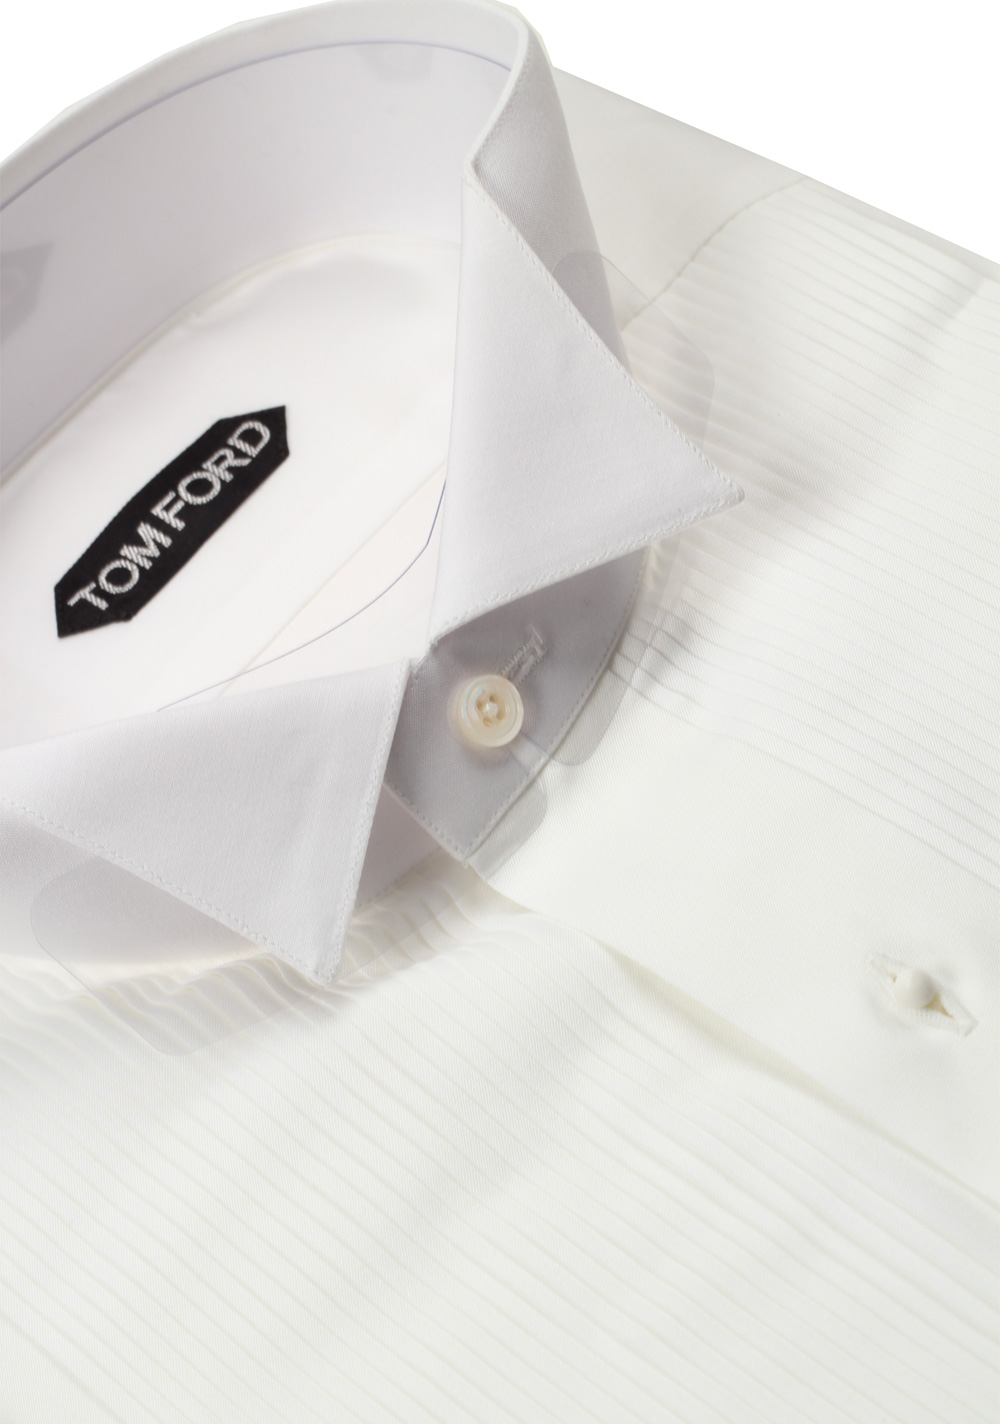 TOM FORD Solid White Tuxedo Shirt Size 41 / 16 U.S. | Costume Limité